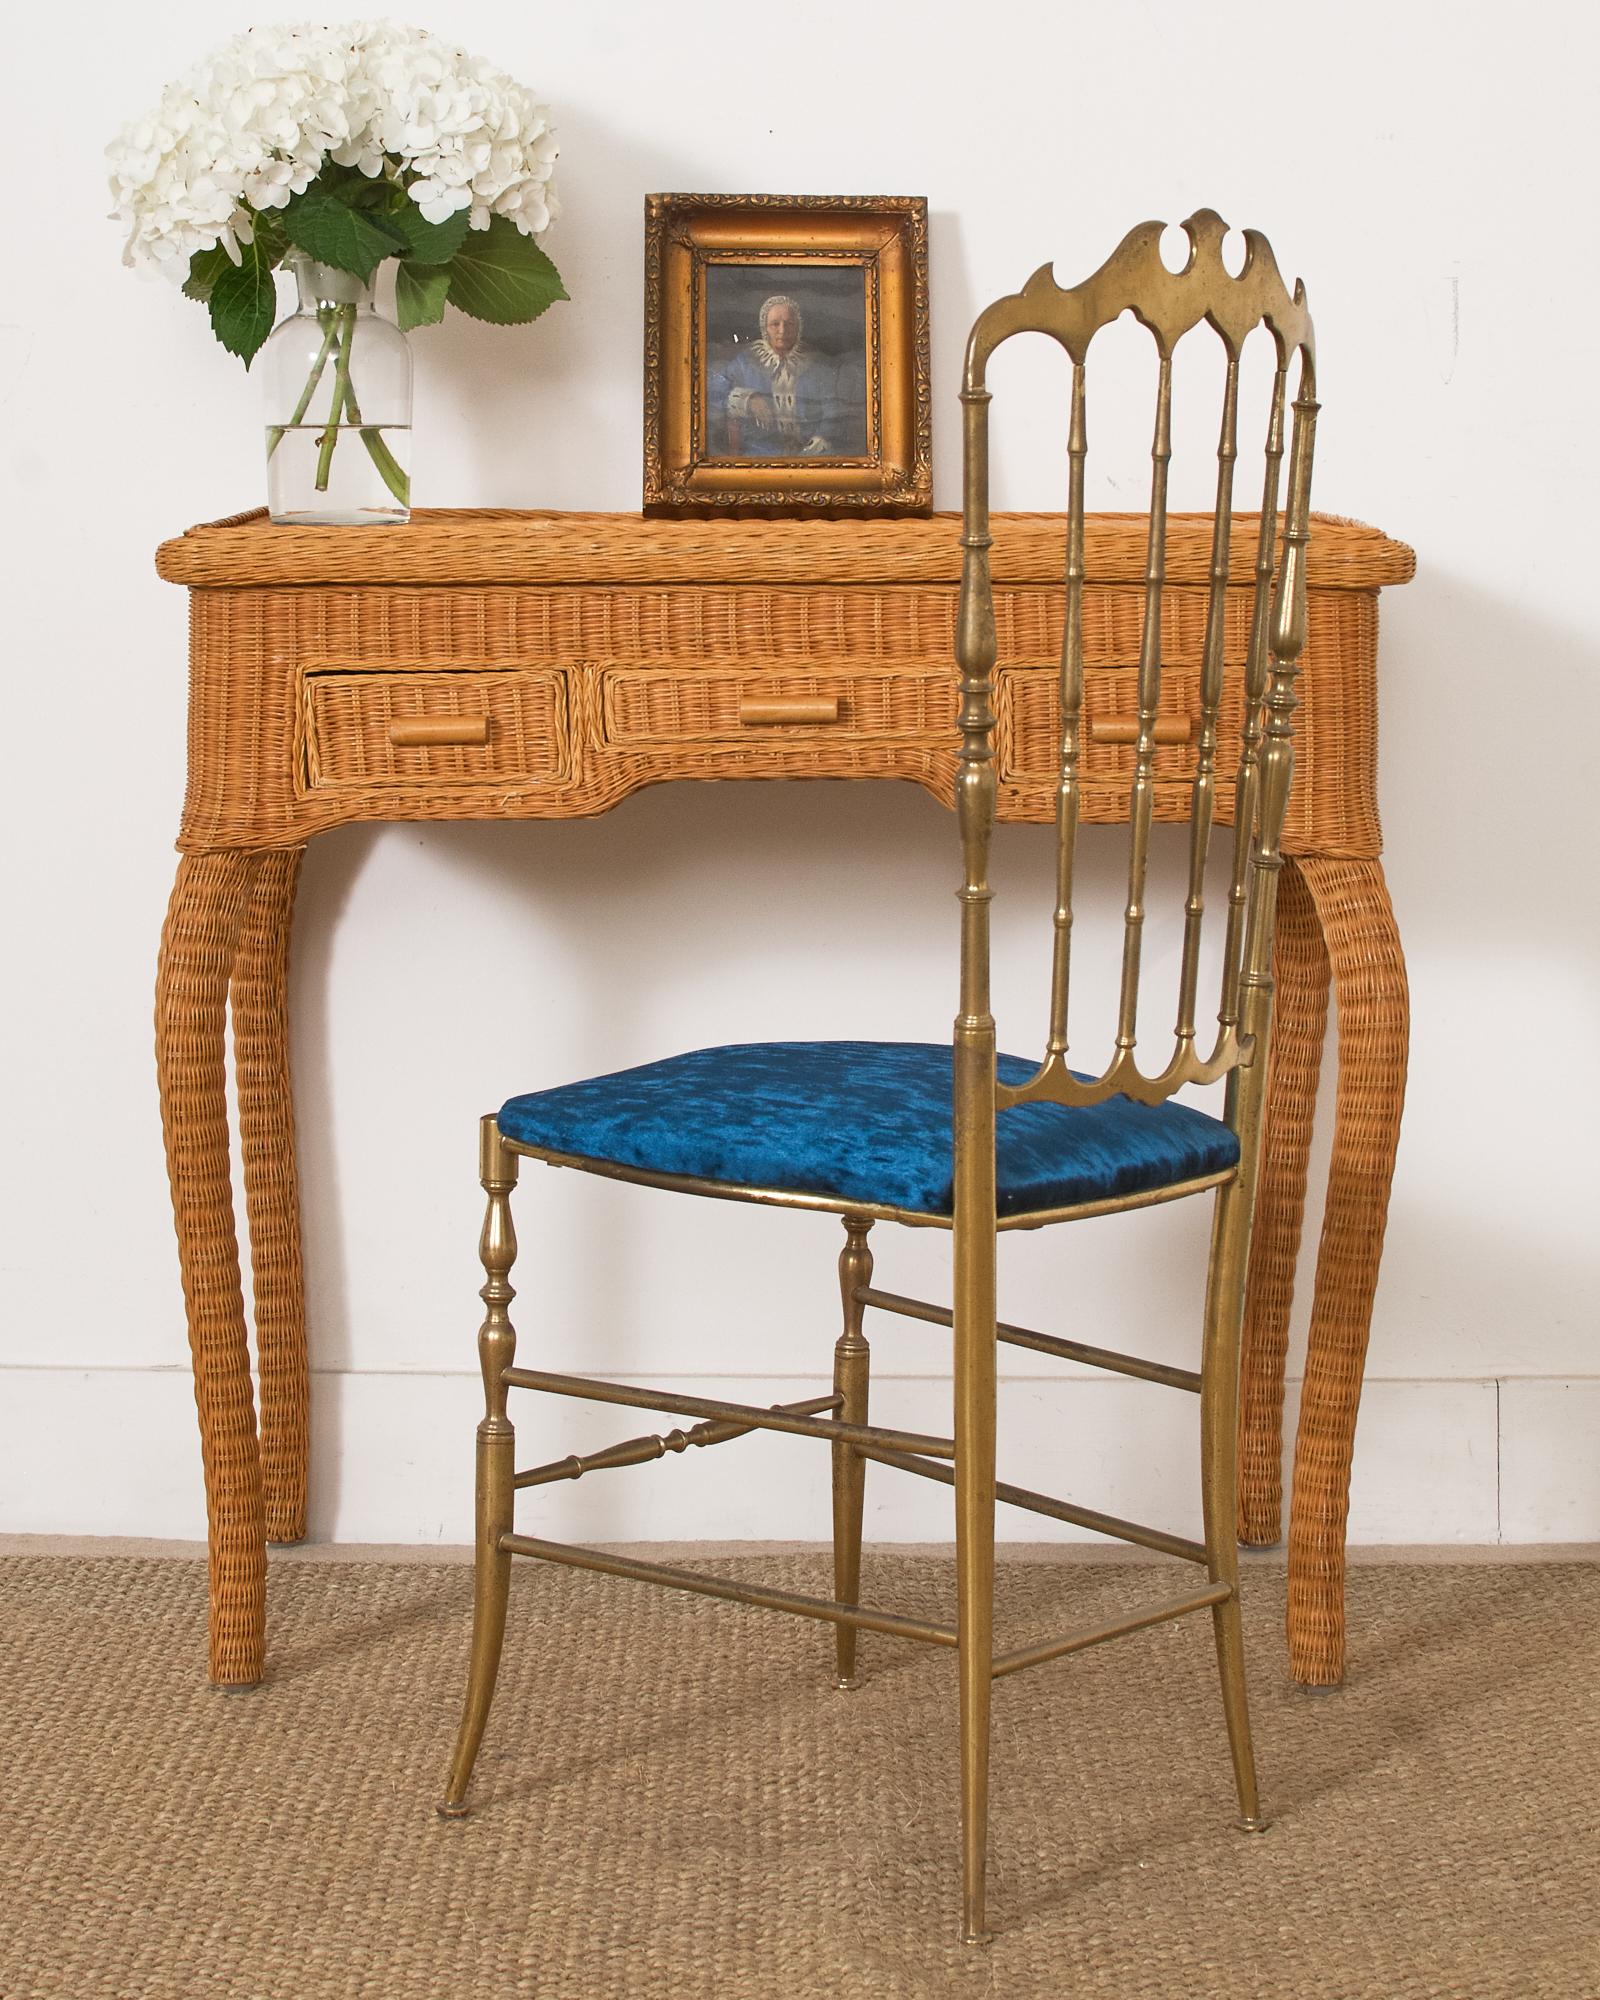 Charming mid-century organic modern vanity desk or dressing table featuring a wooden frame covered with woven wicker. The vanity has a clamshell style flip-top to reveal a large storage area below with a spectacular framed mirror. The vanity is